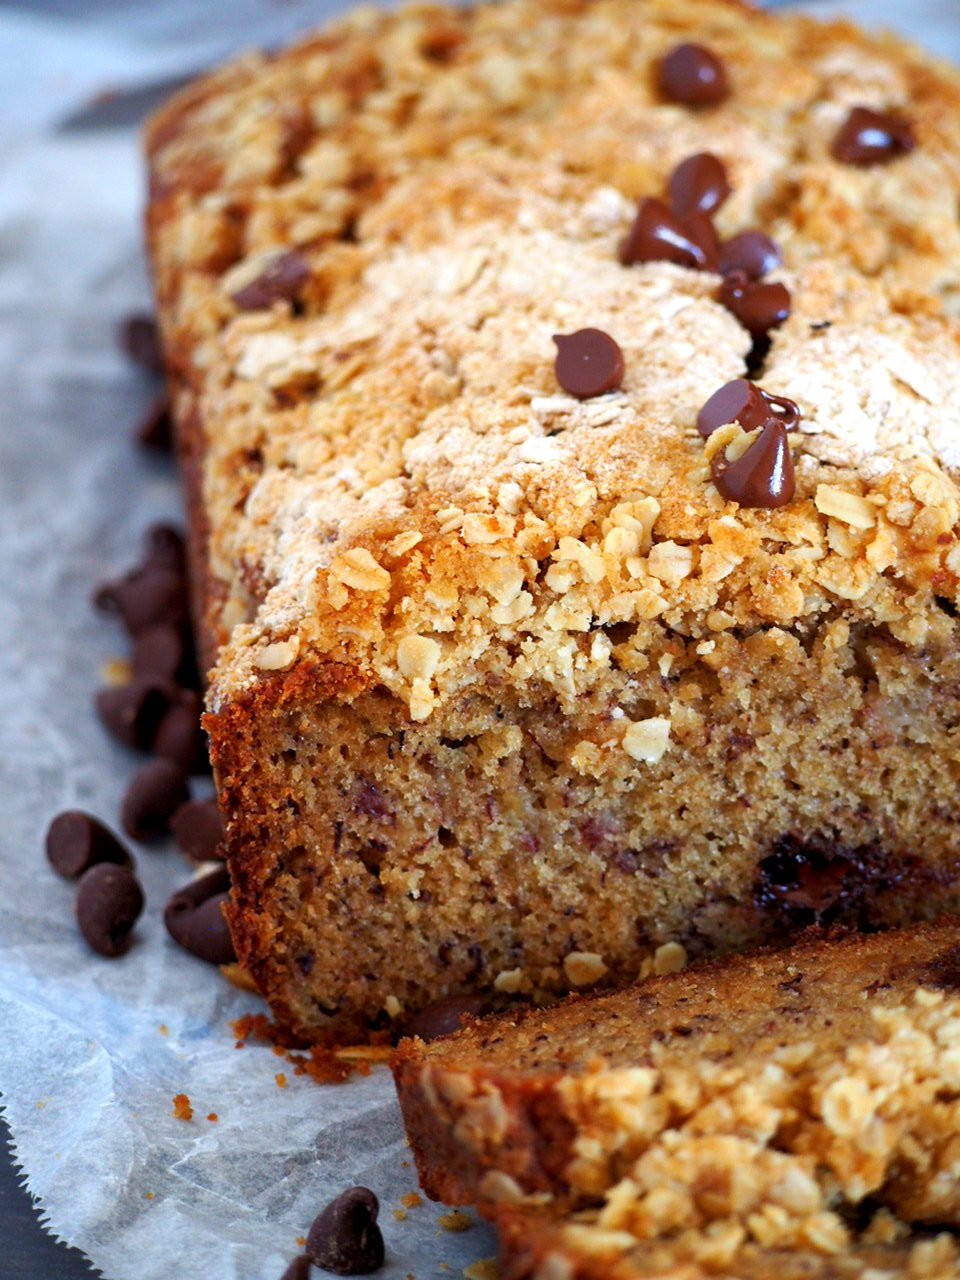 Close up view of Chocolate Chip banana cake showing the inside crumbs.